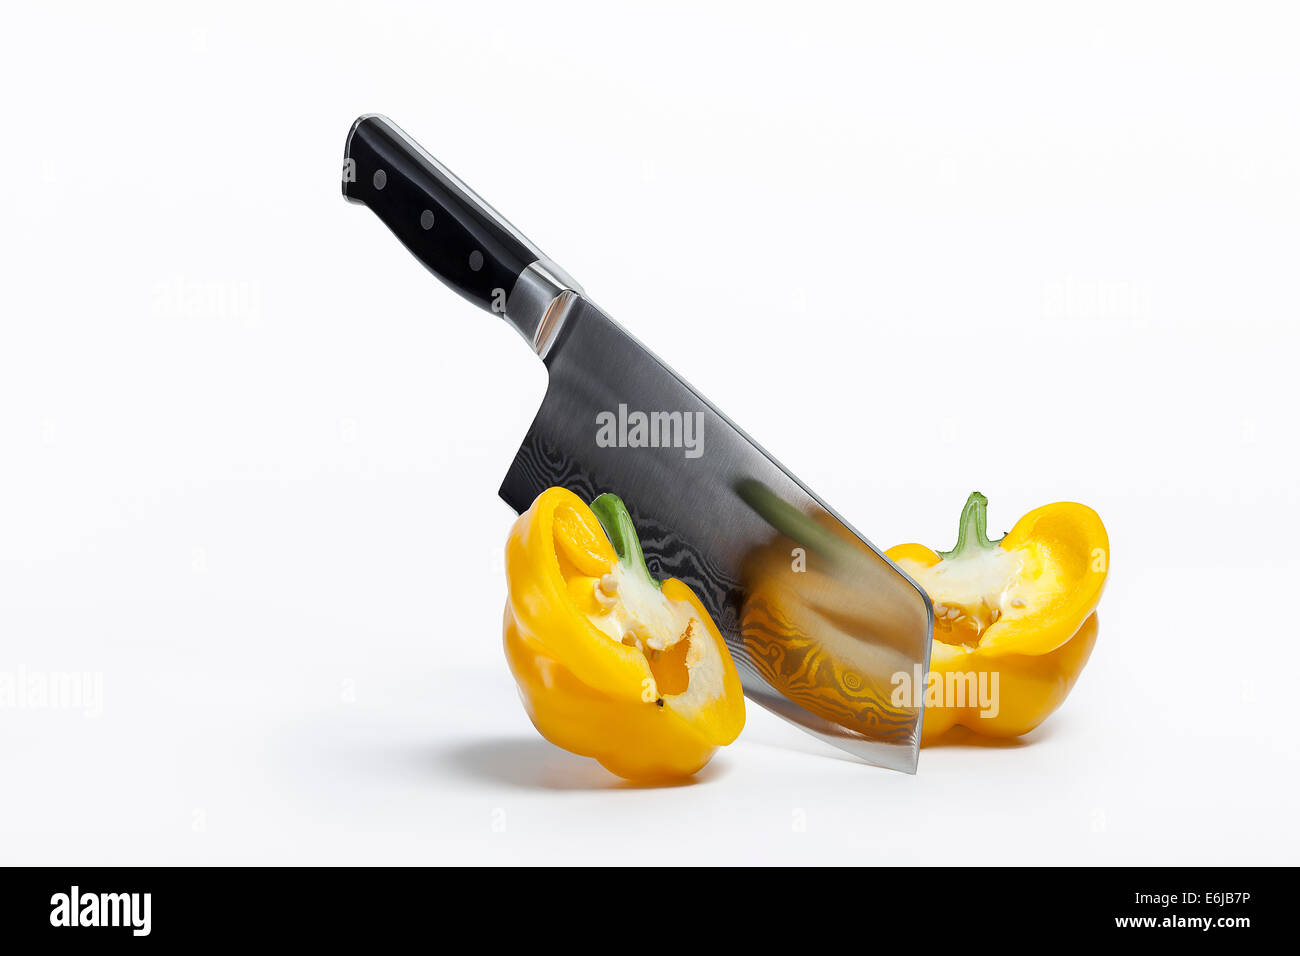 Chefs chopping knife slicing through yellow pepper Stock Photo